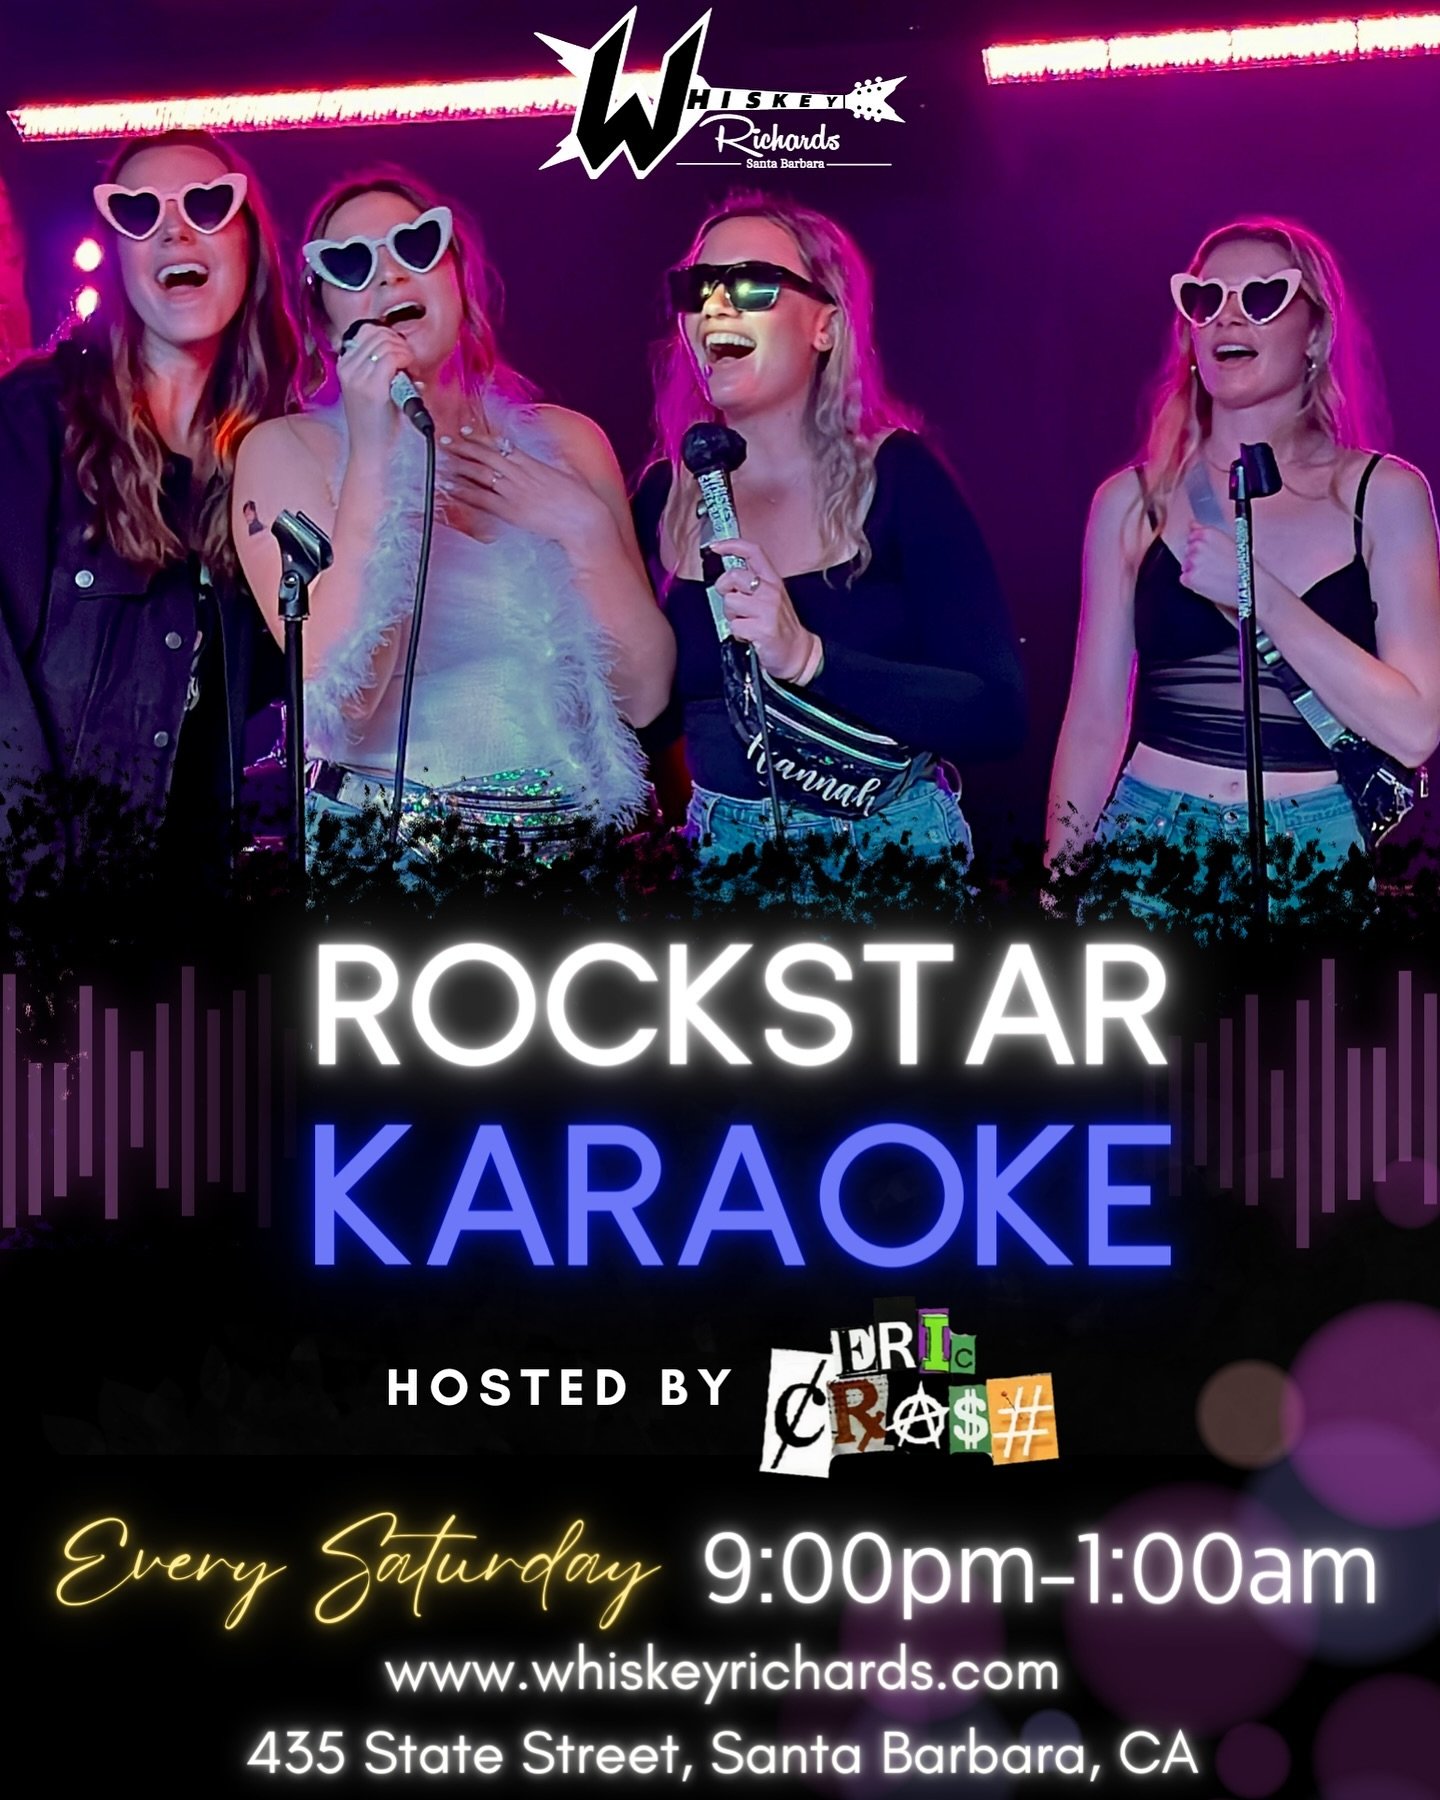 Grab the mic, step into the limelight, and let your voice soar at Whiskey Richards Rockstar Karaoke night! It&rsquo;s your chance to shine like a true rock icon! #RockstarKaraoke #DowntownSB #MagicMoments #SantaBarbara #WhiskeyRichards #Bachelorette 